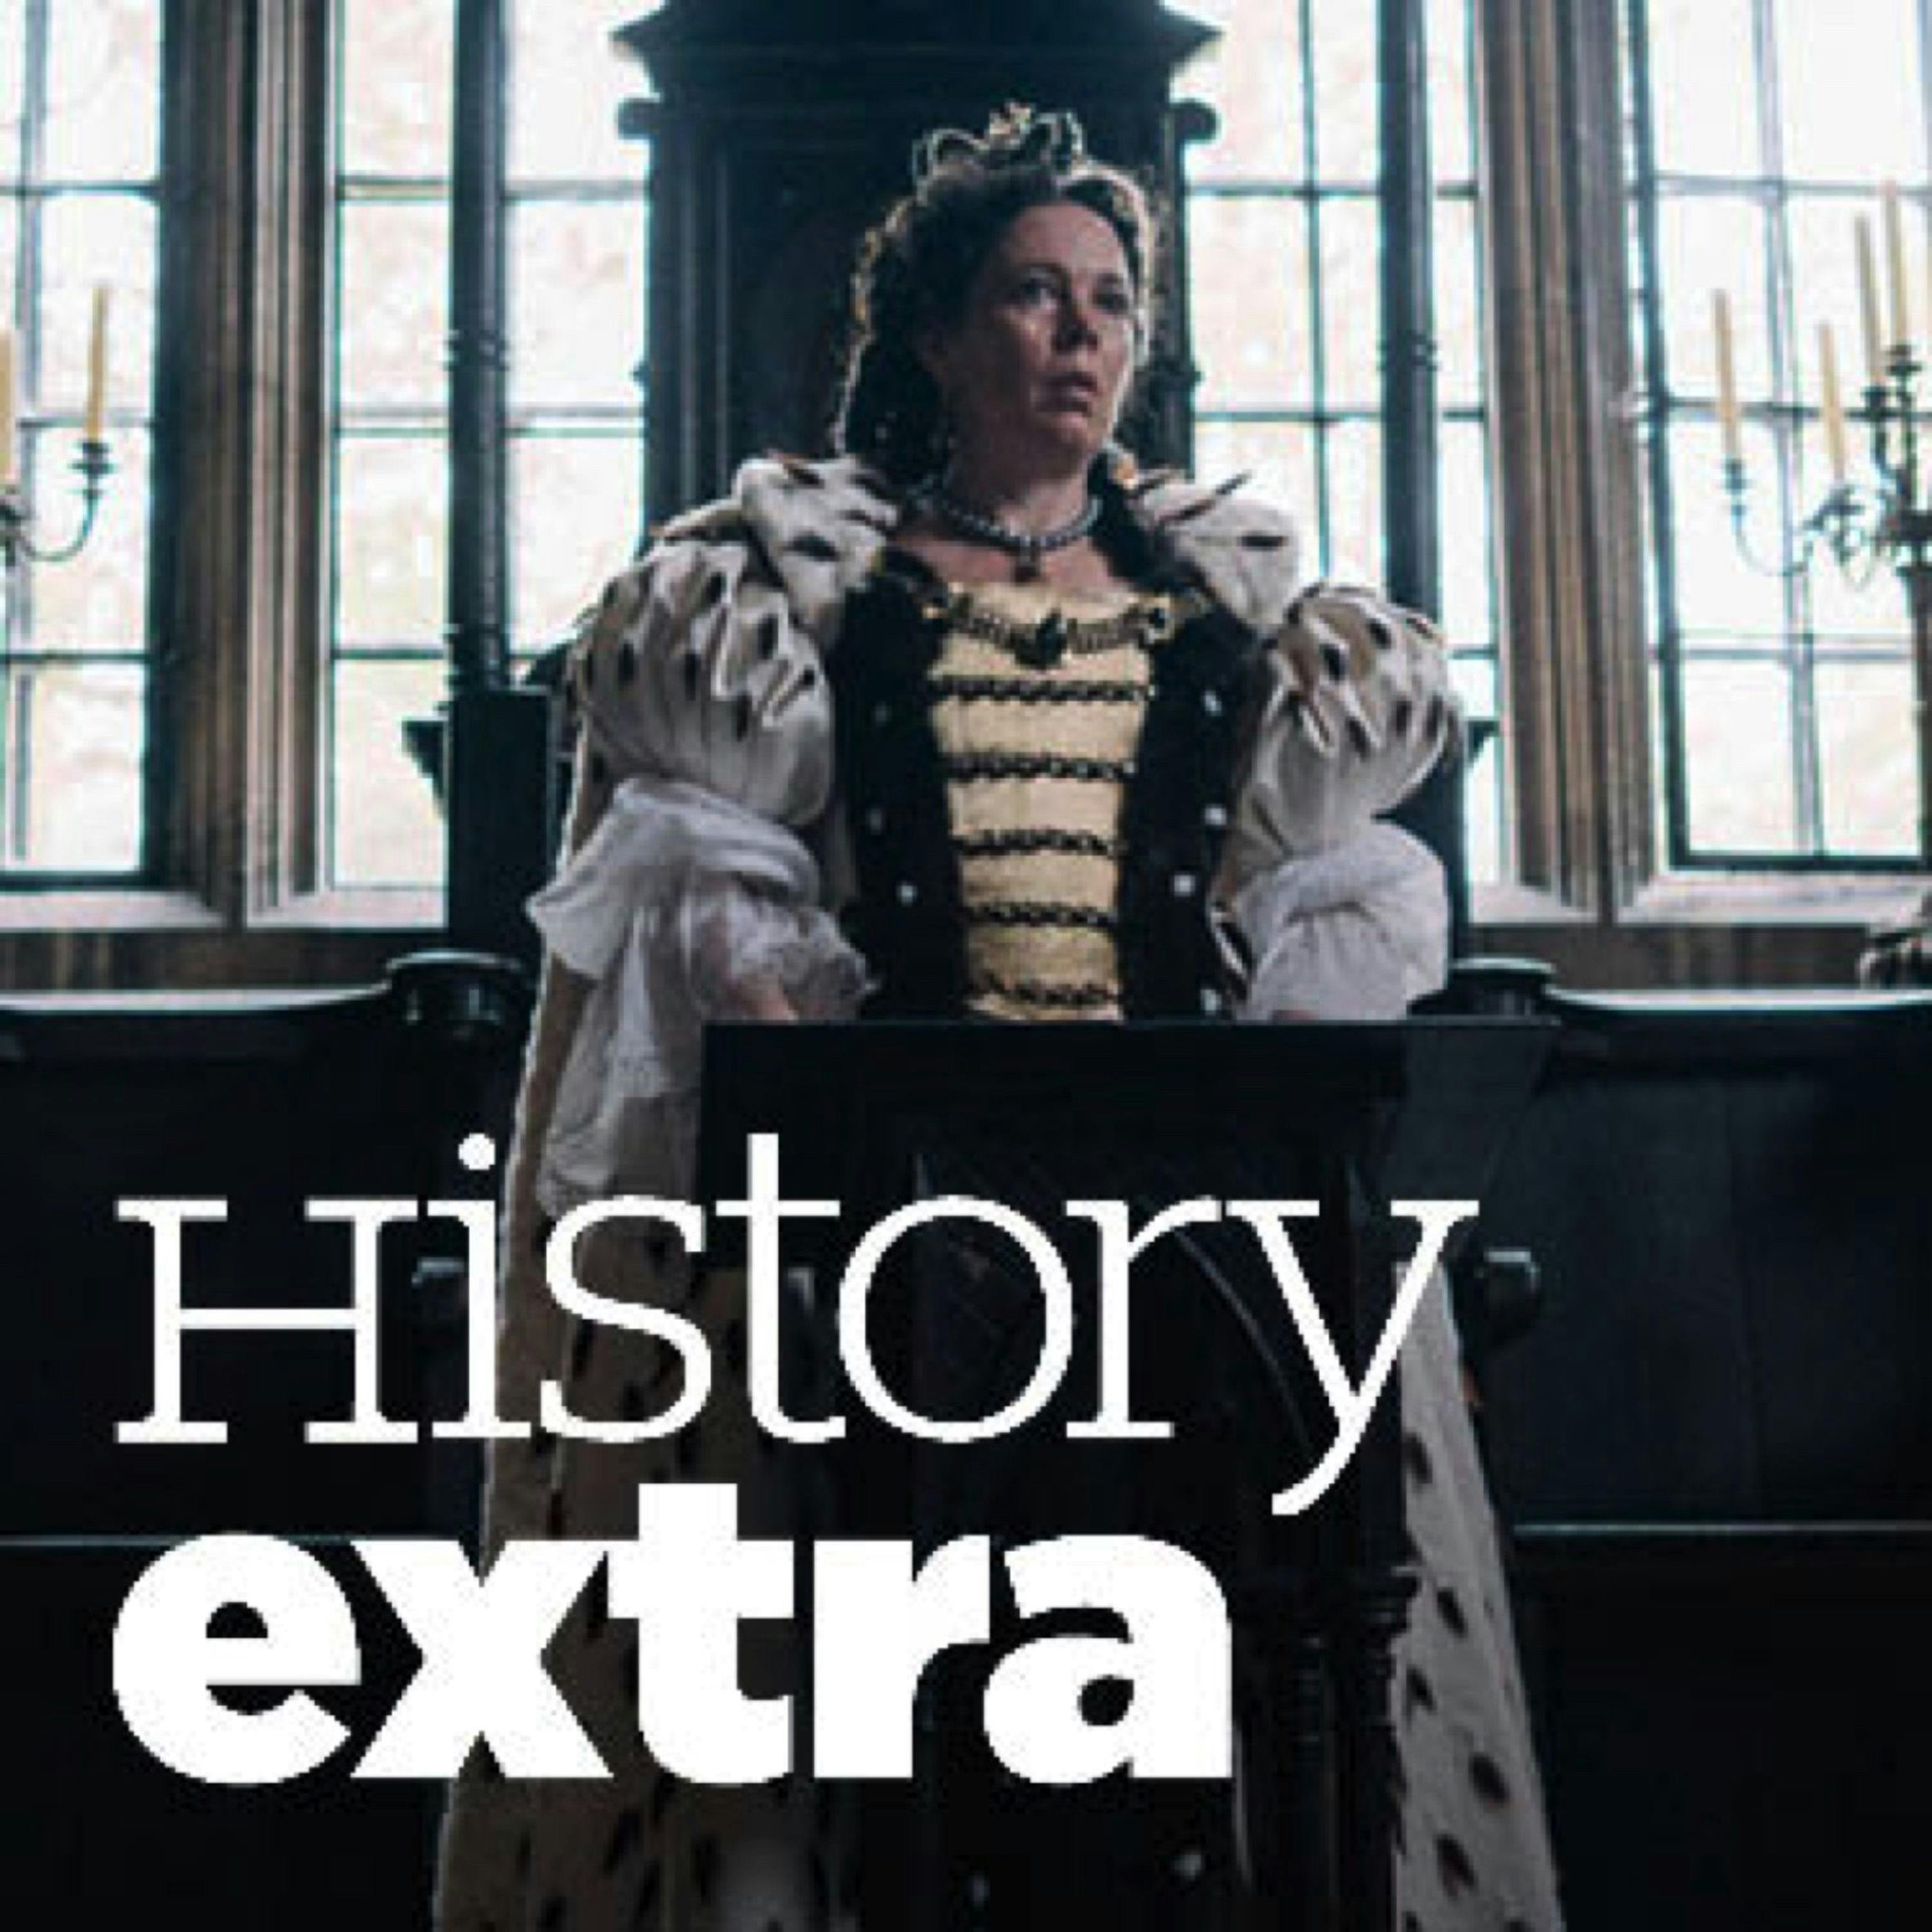 The true history of The Favourite